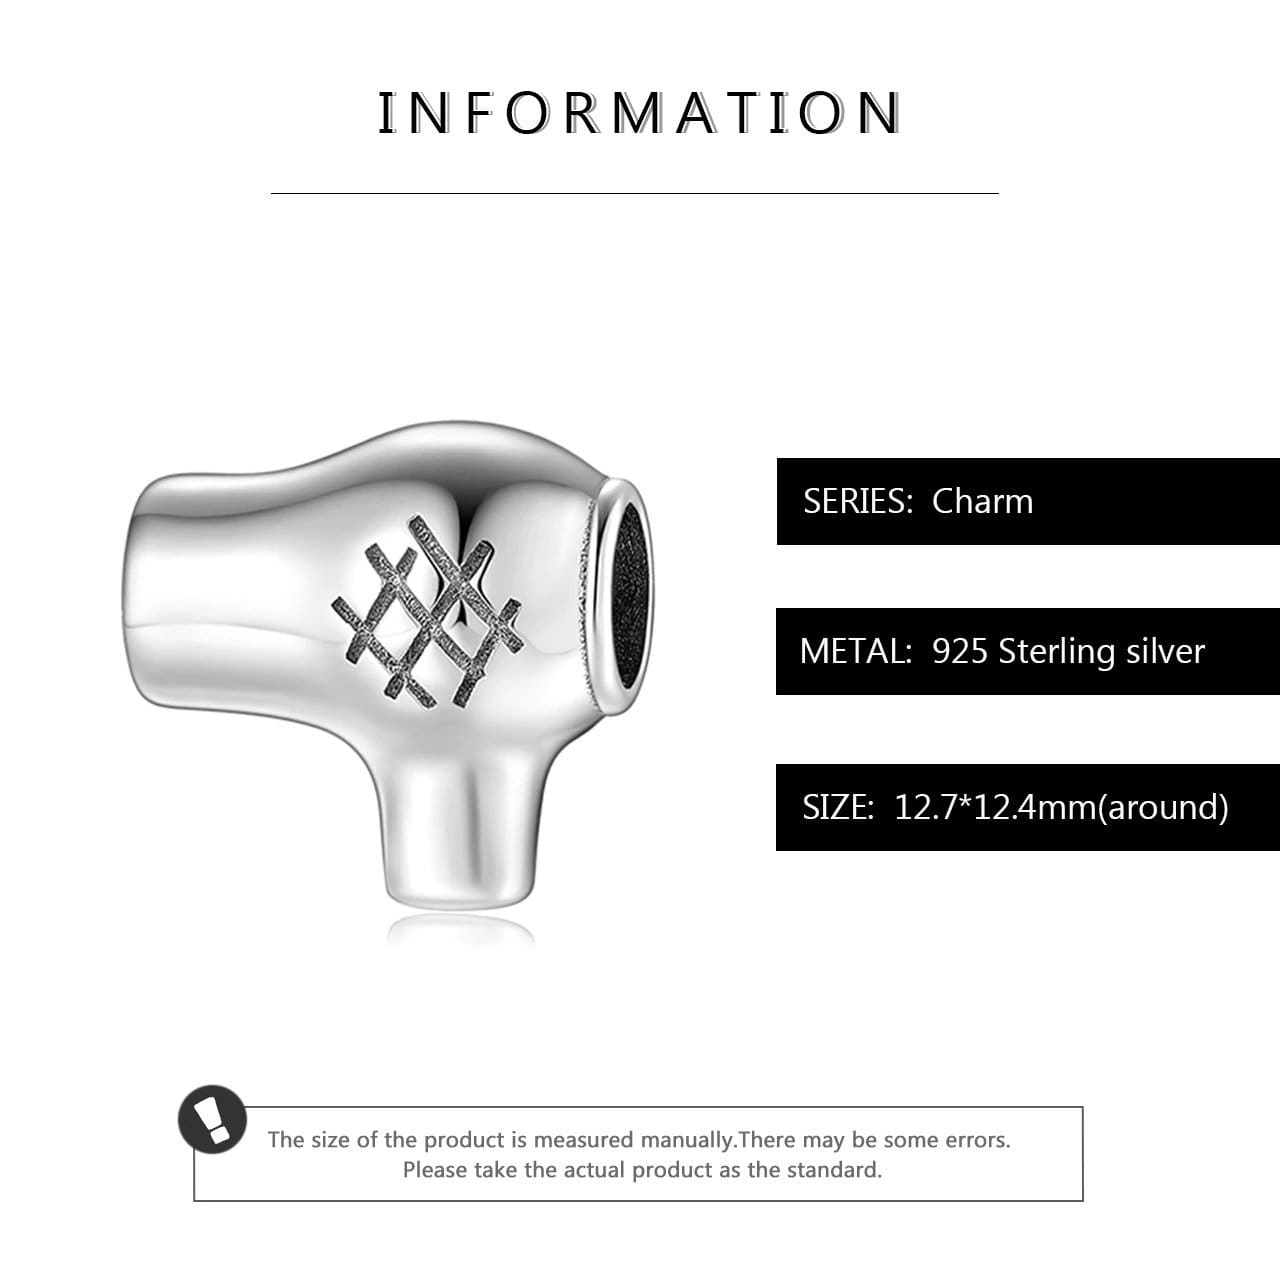 Hairdryer Charm - The Silver Goose SA